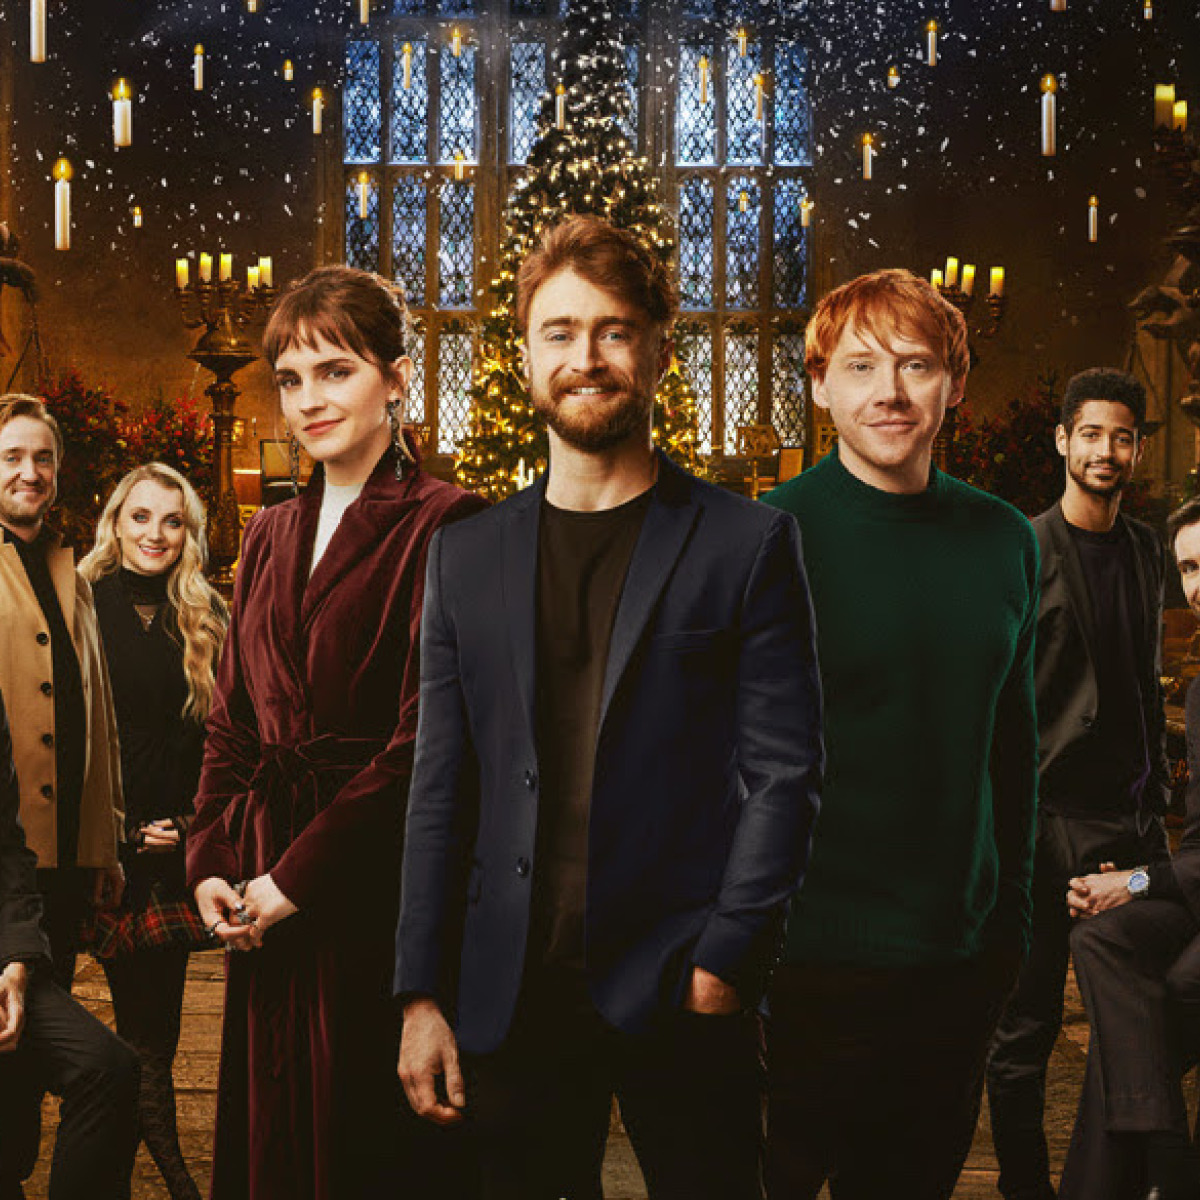 The Harry Potter Cast: Supporting Each Other's Careers